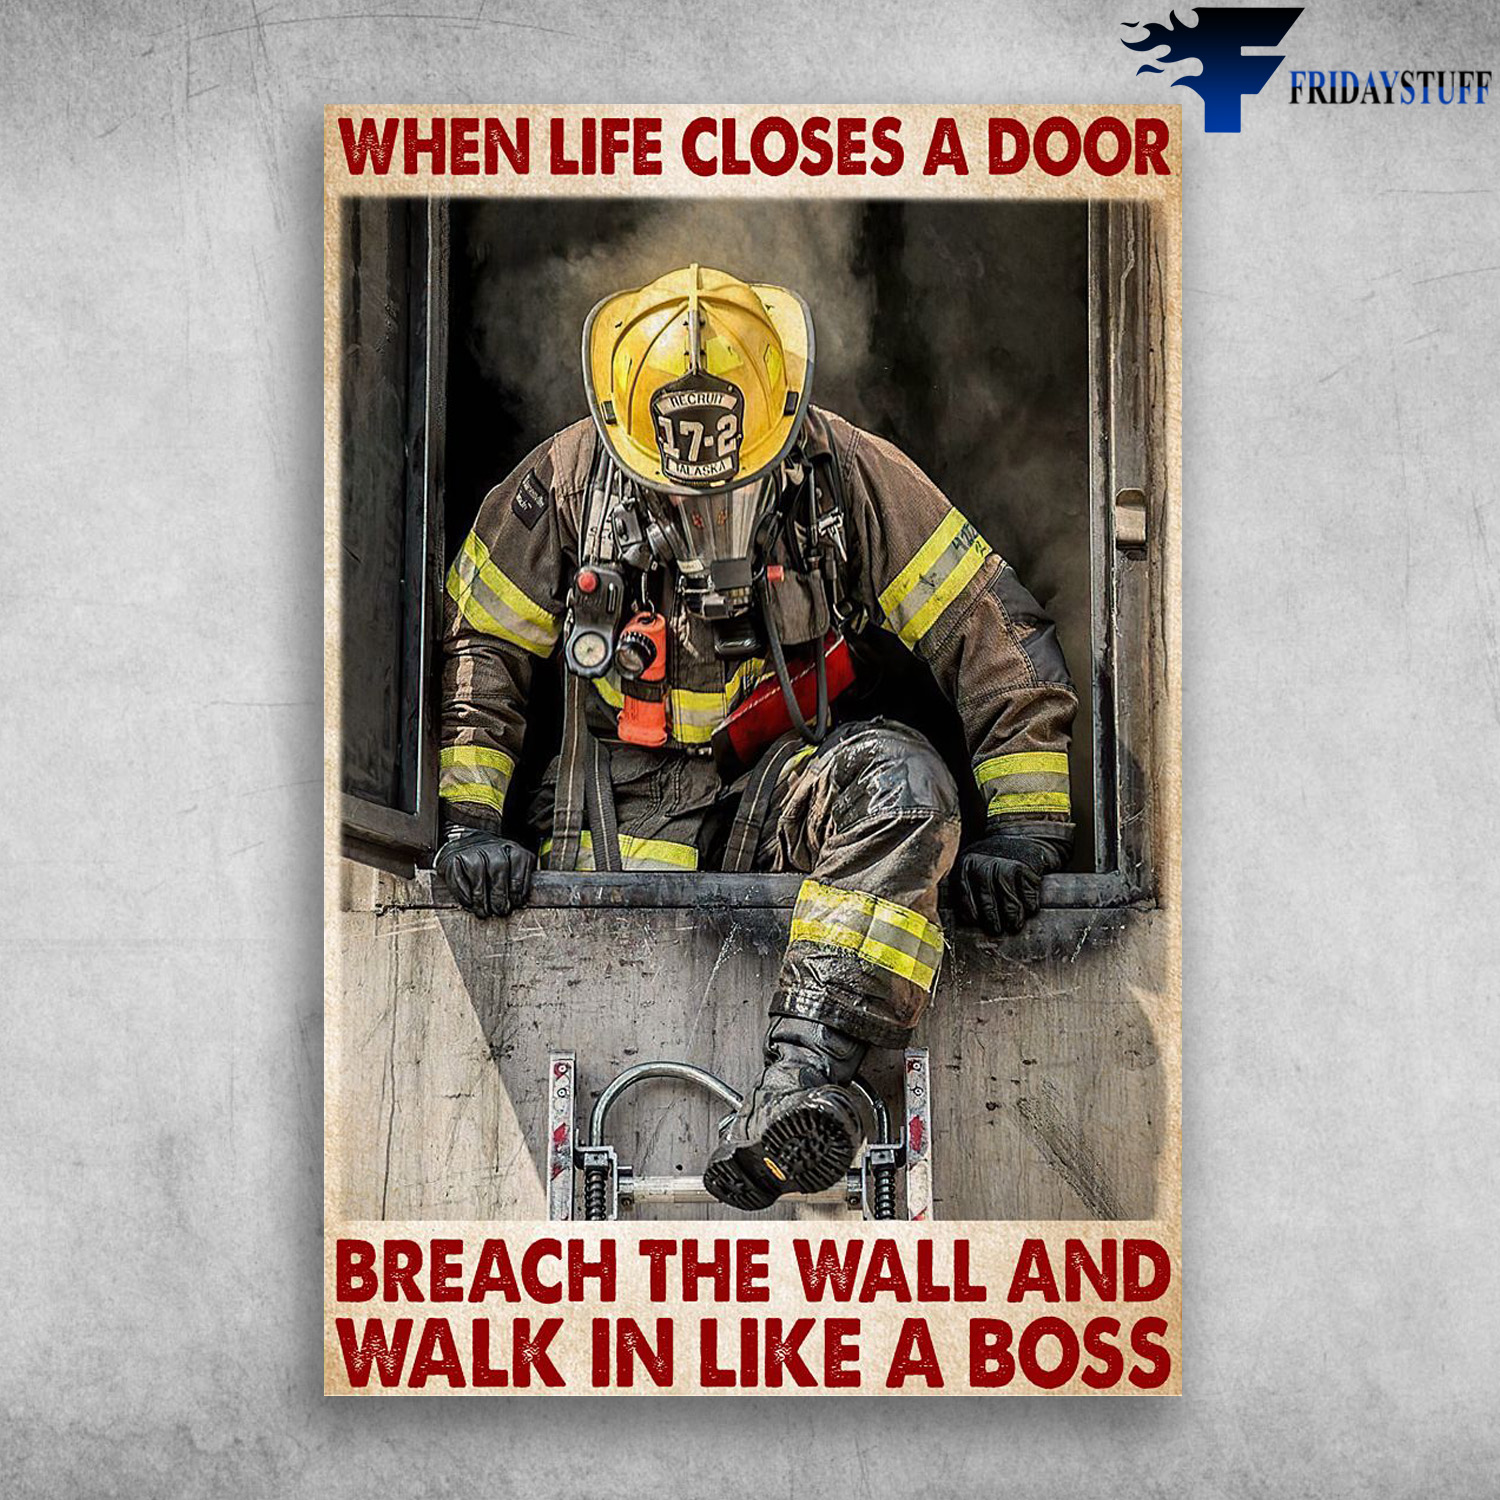 Firefighter Stepped Through The Window - When Life Closes A Door, Breach The Wall And Walk In Like A Boss